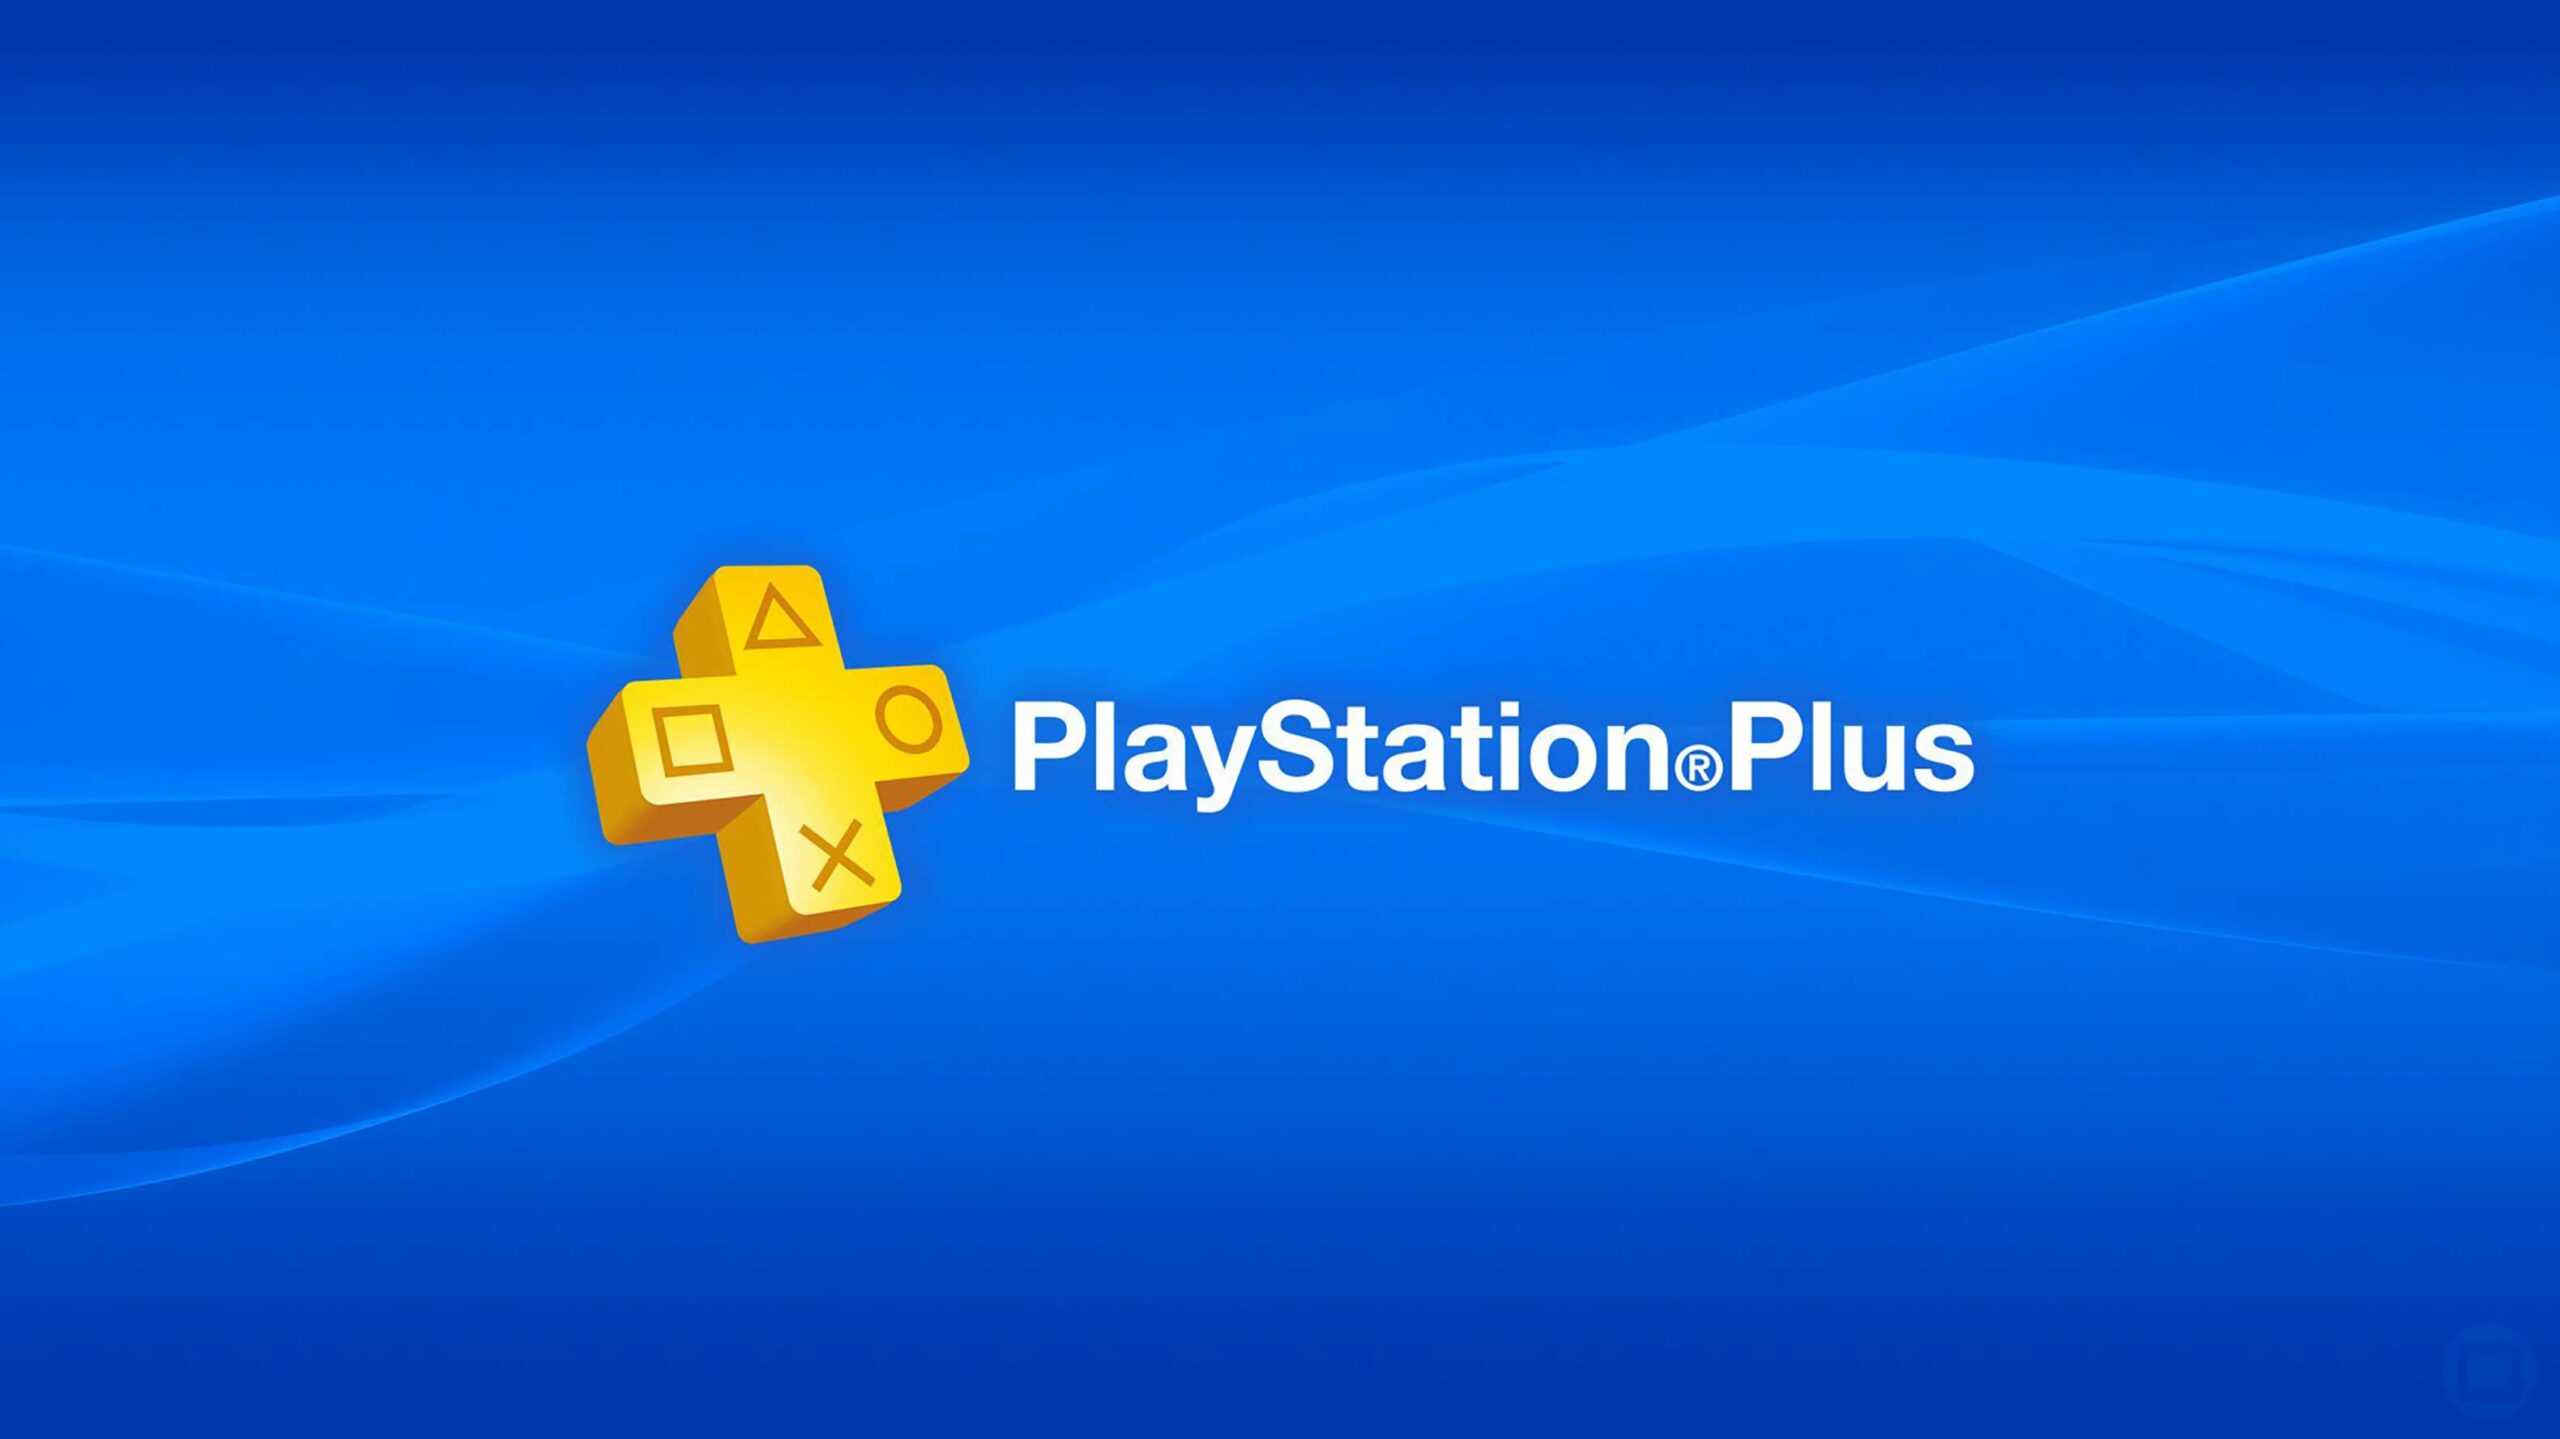 playstation plus cost per month